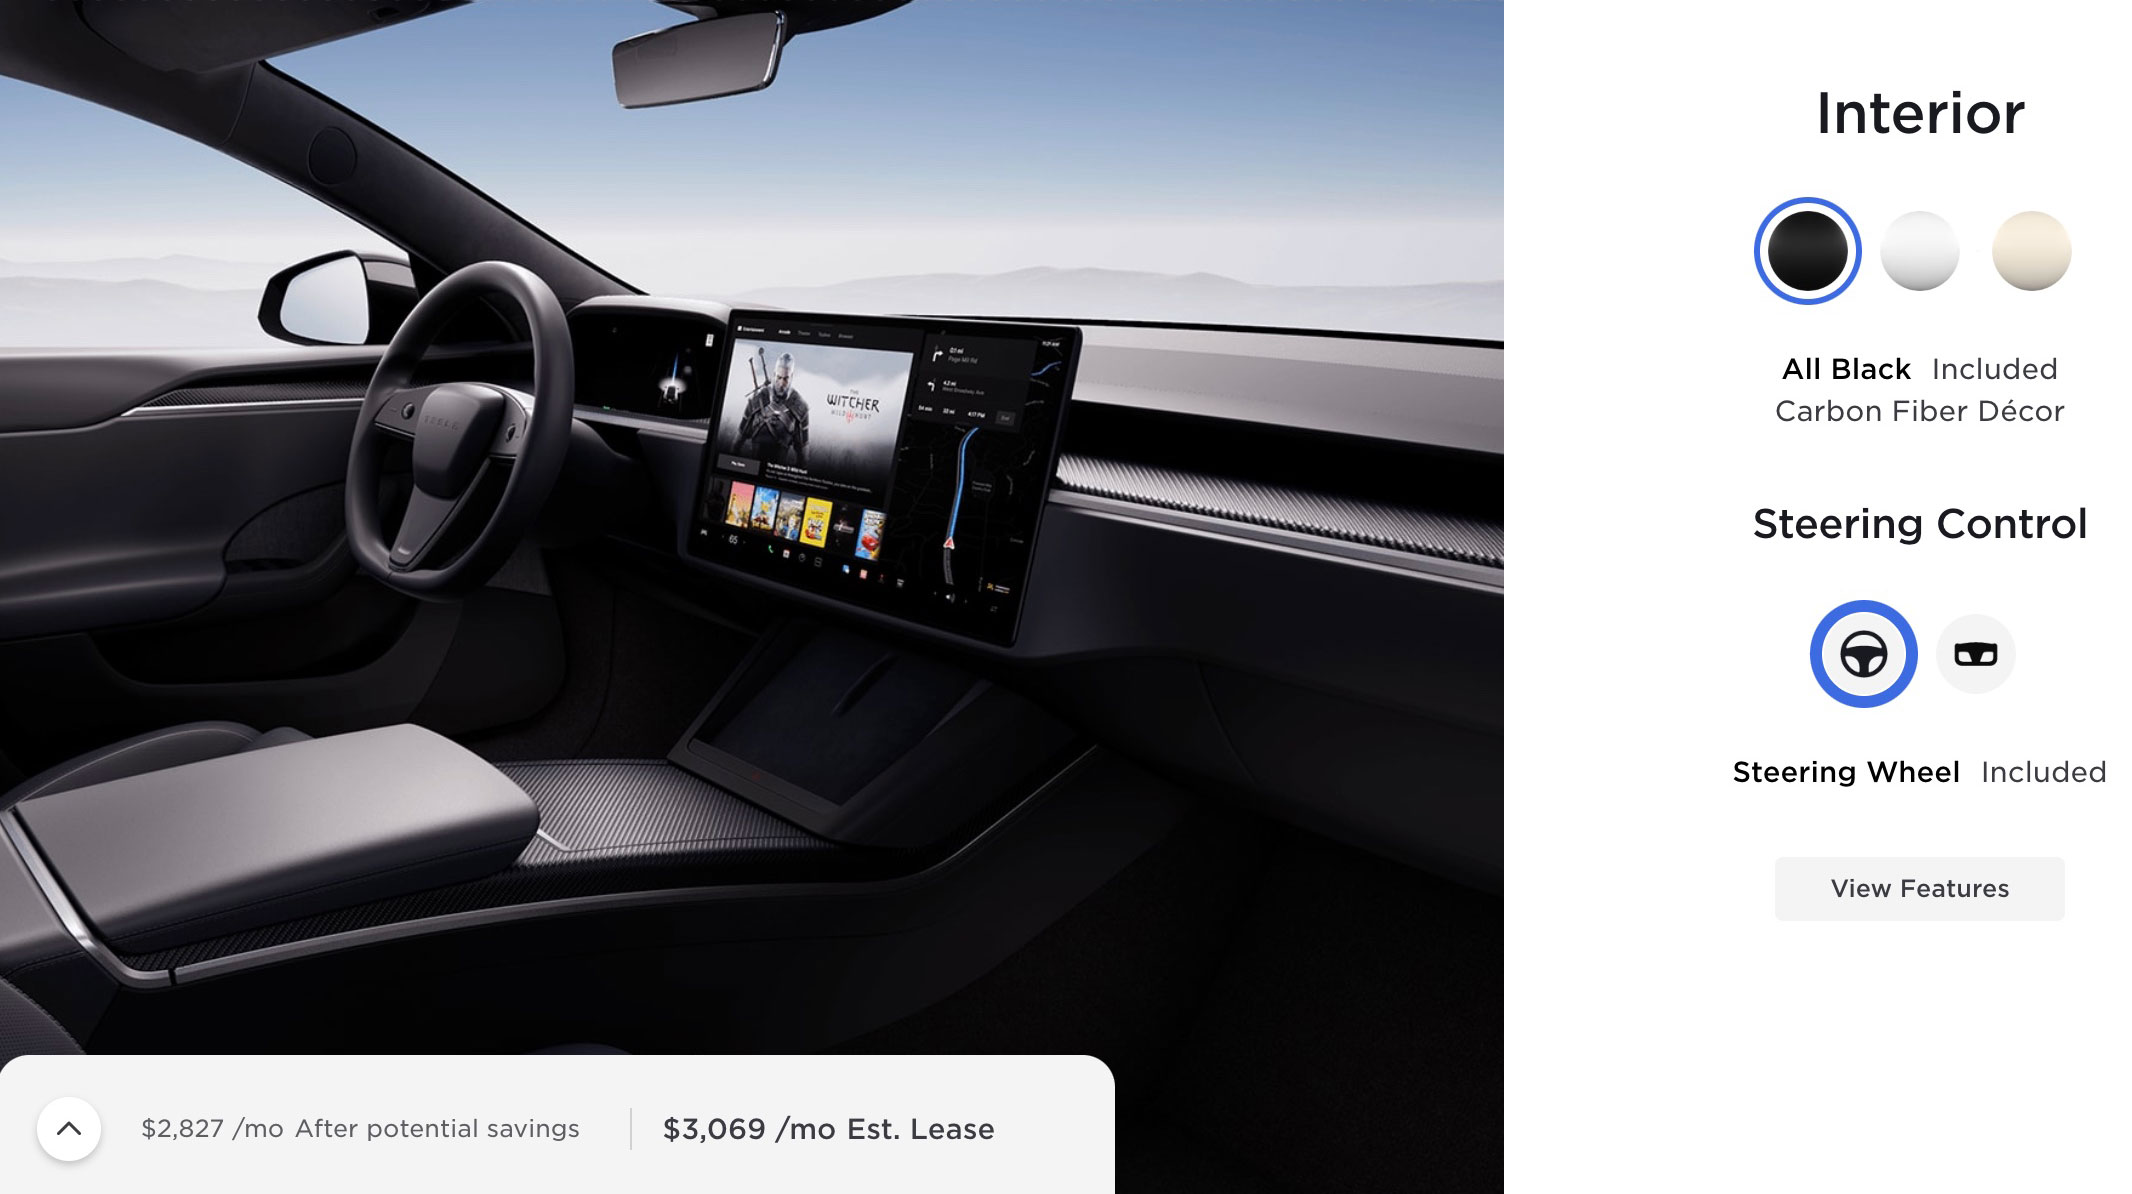 Round steering wheel option now available for Tesla Model X/S